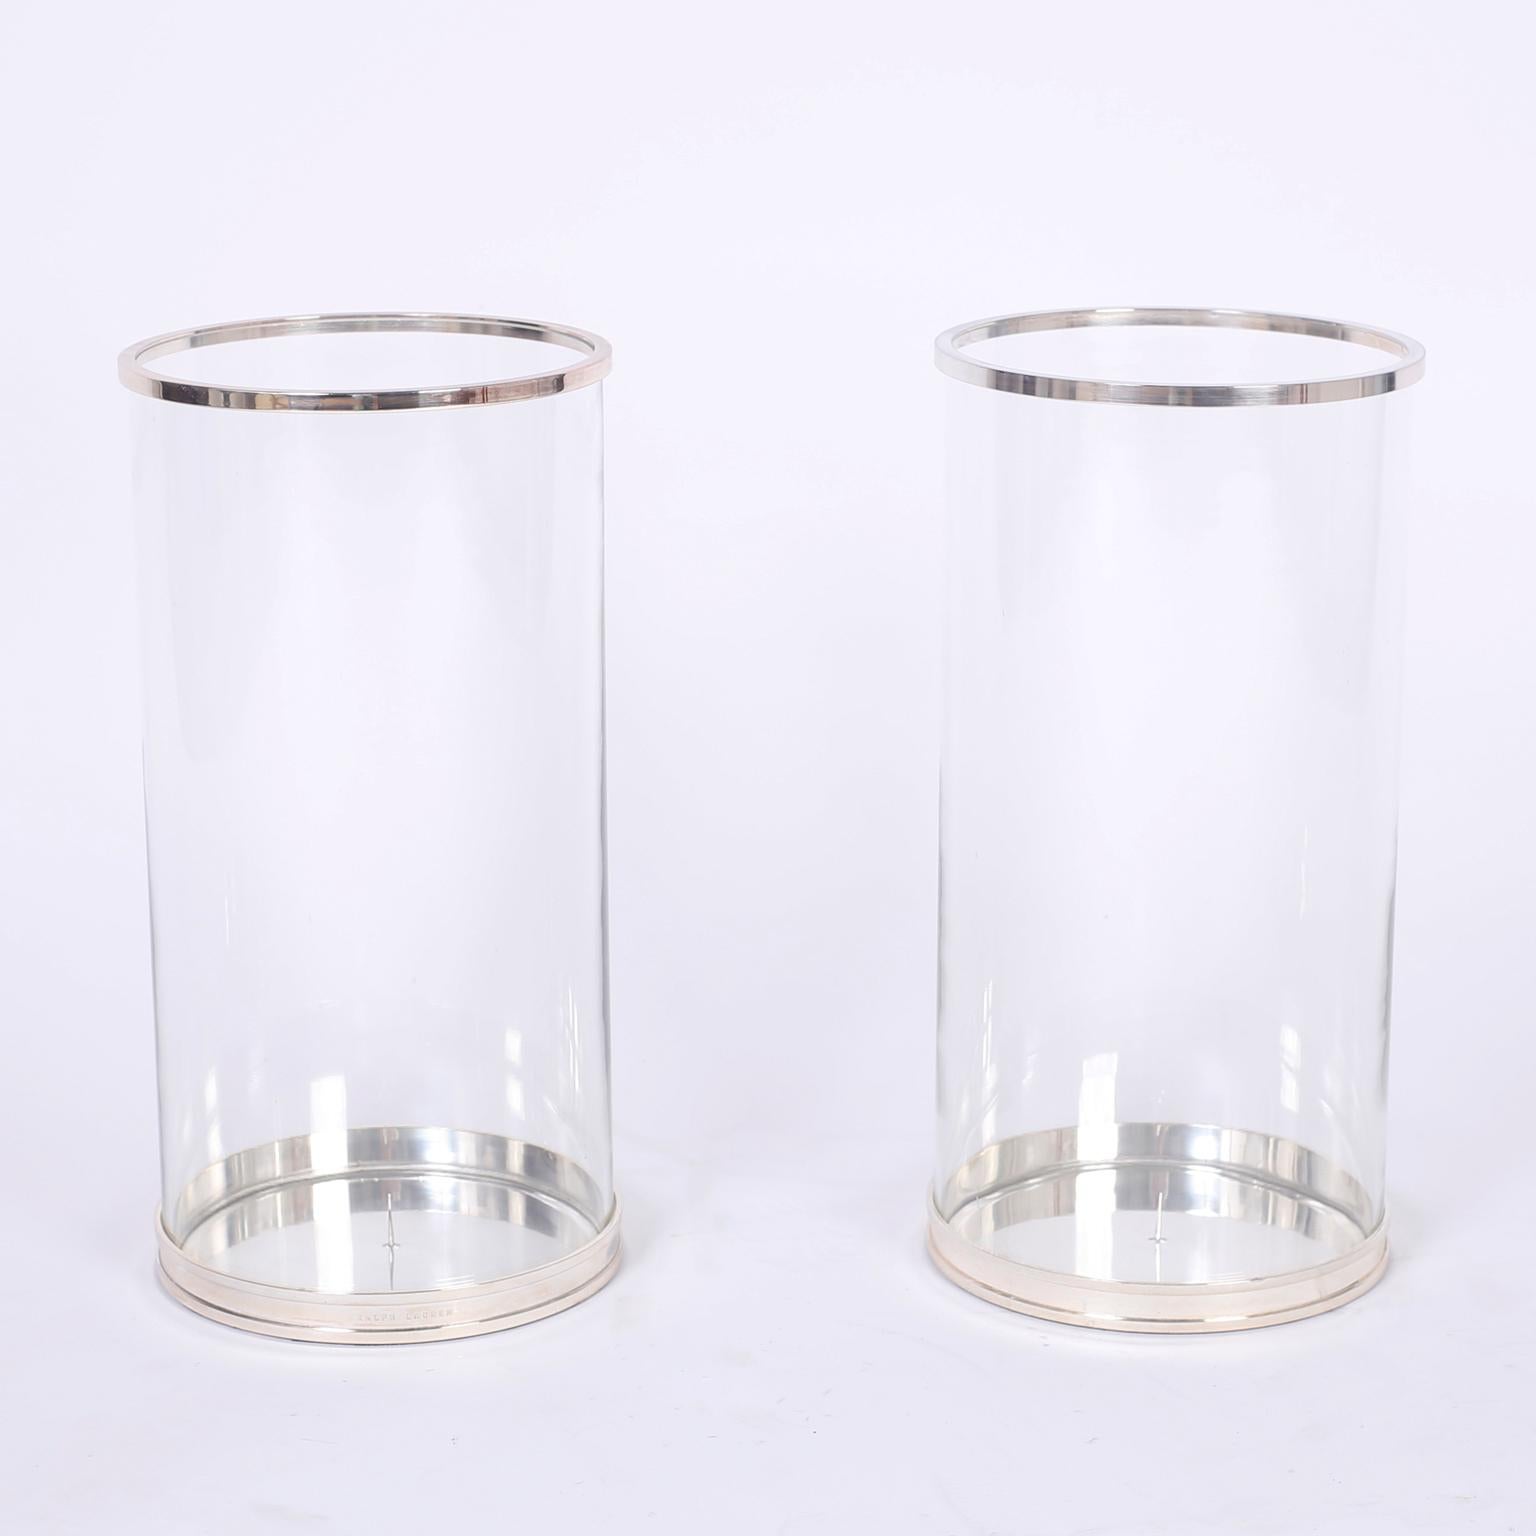 Here are three chic hurricane candleholders each with silvered metal bases and rims, glass cylinders, and a sleek modern form. Outside pair are signed Ralph Lauren on the bases.

Measures: Outside pair- Height 18, diameter 9
Center single- Height